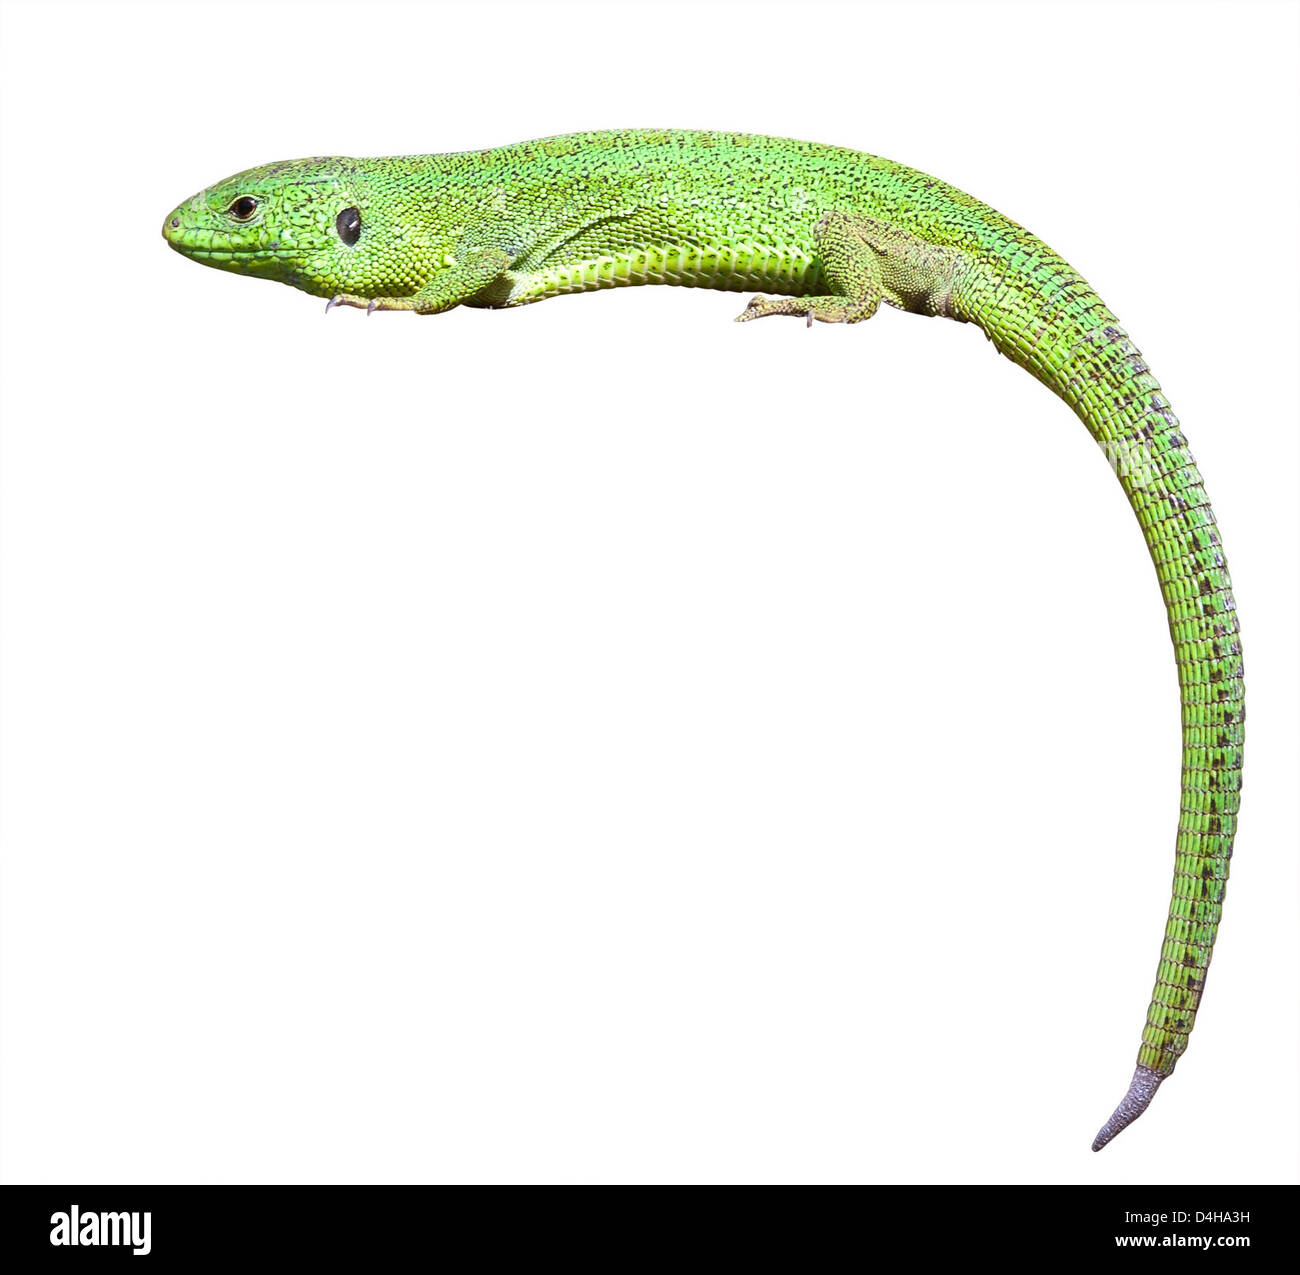 Green lizard. Isolated over white background. Stock Photo